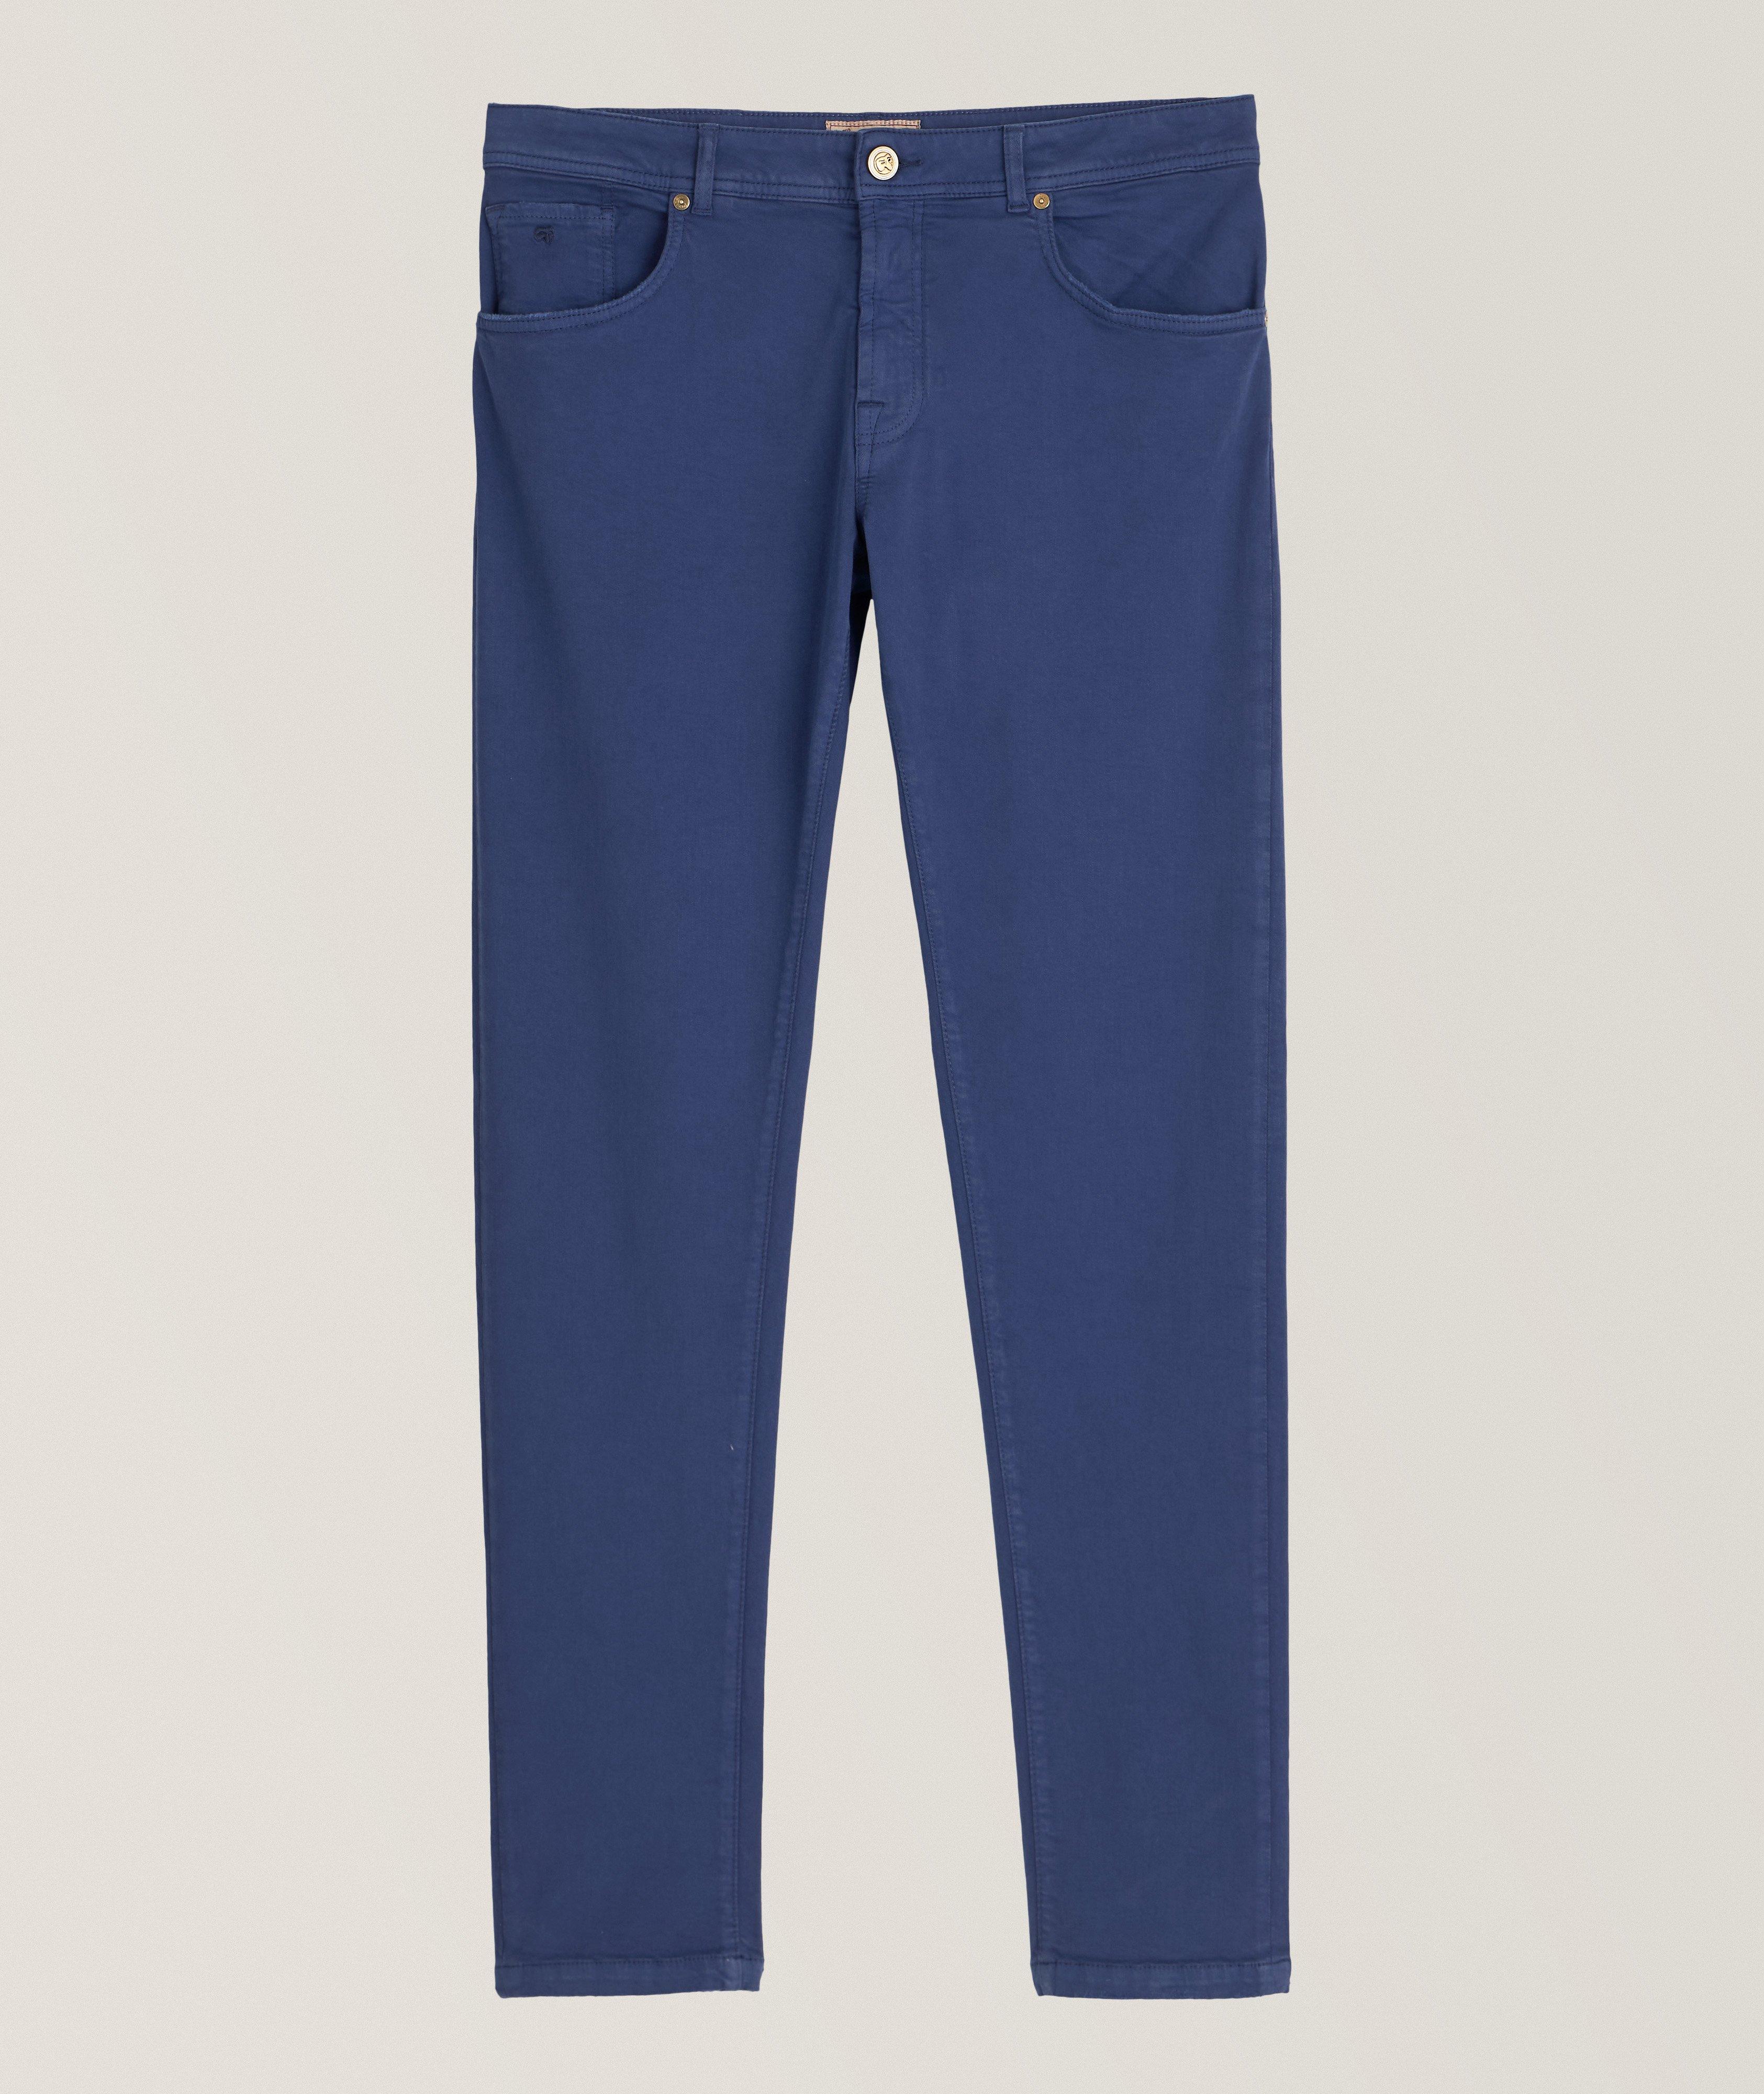 Limited Edition 5-Pocket Style Stretch-Cotton Jeans  image 0